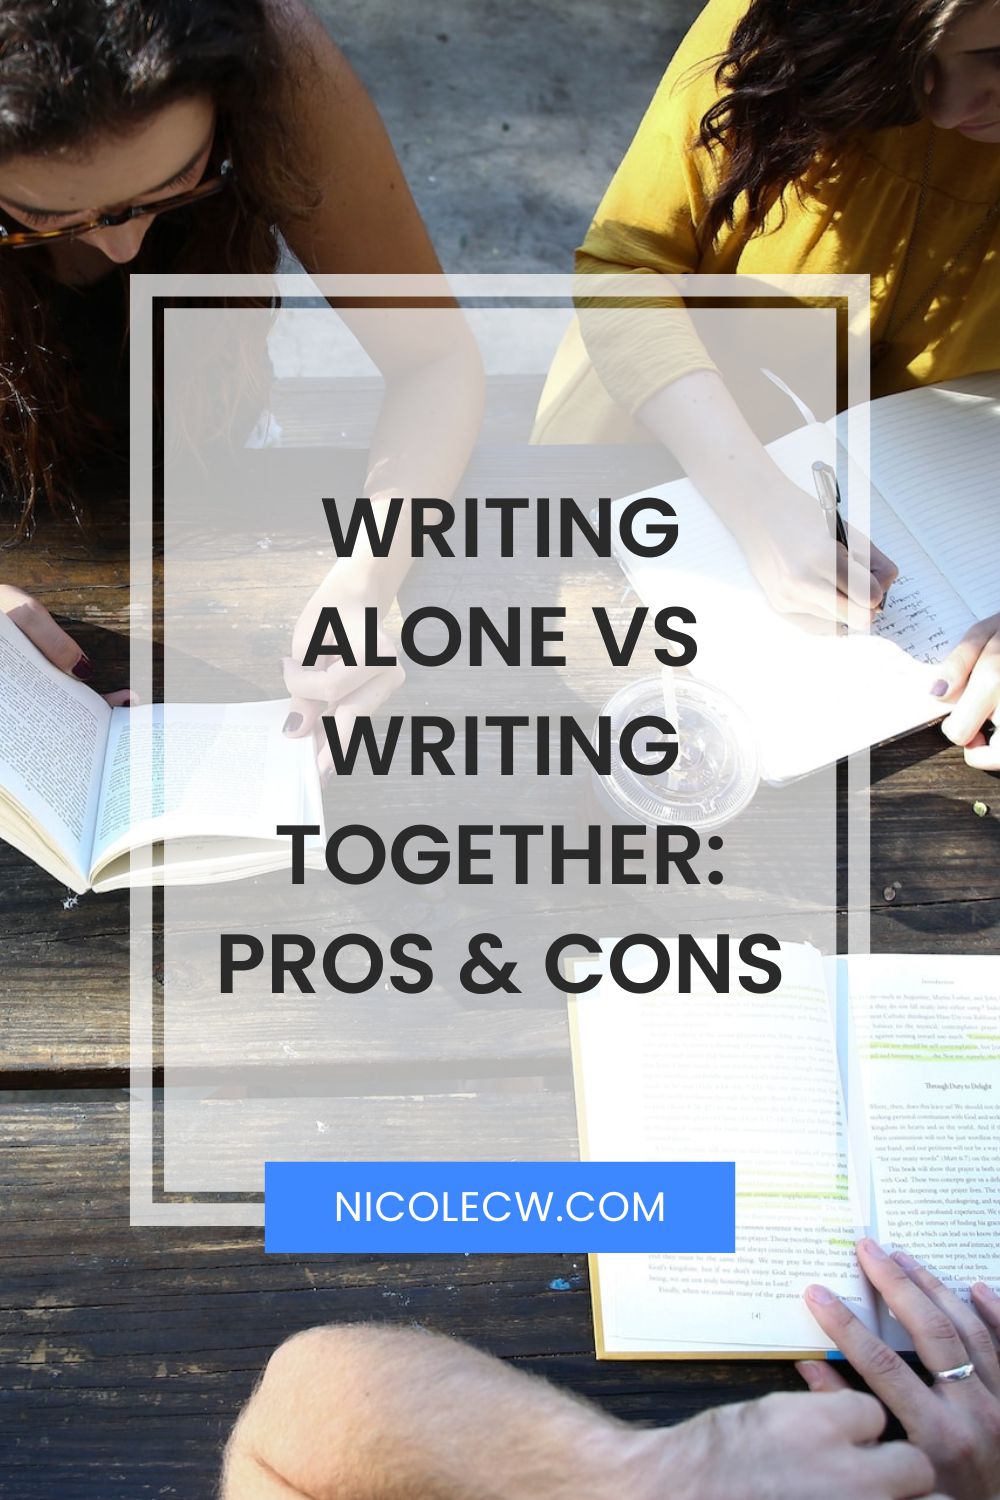 [Self-Publishing Tips] Writing Alone vs Writing Together - Pros & Cons